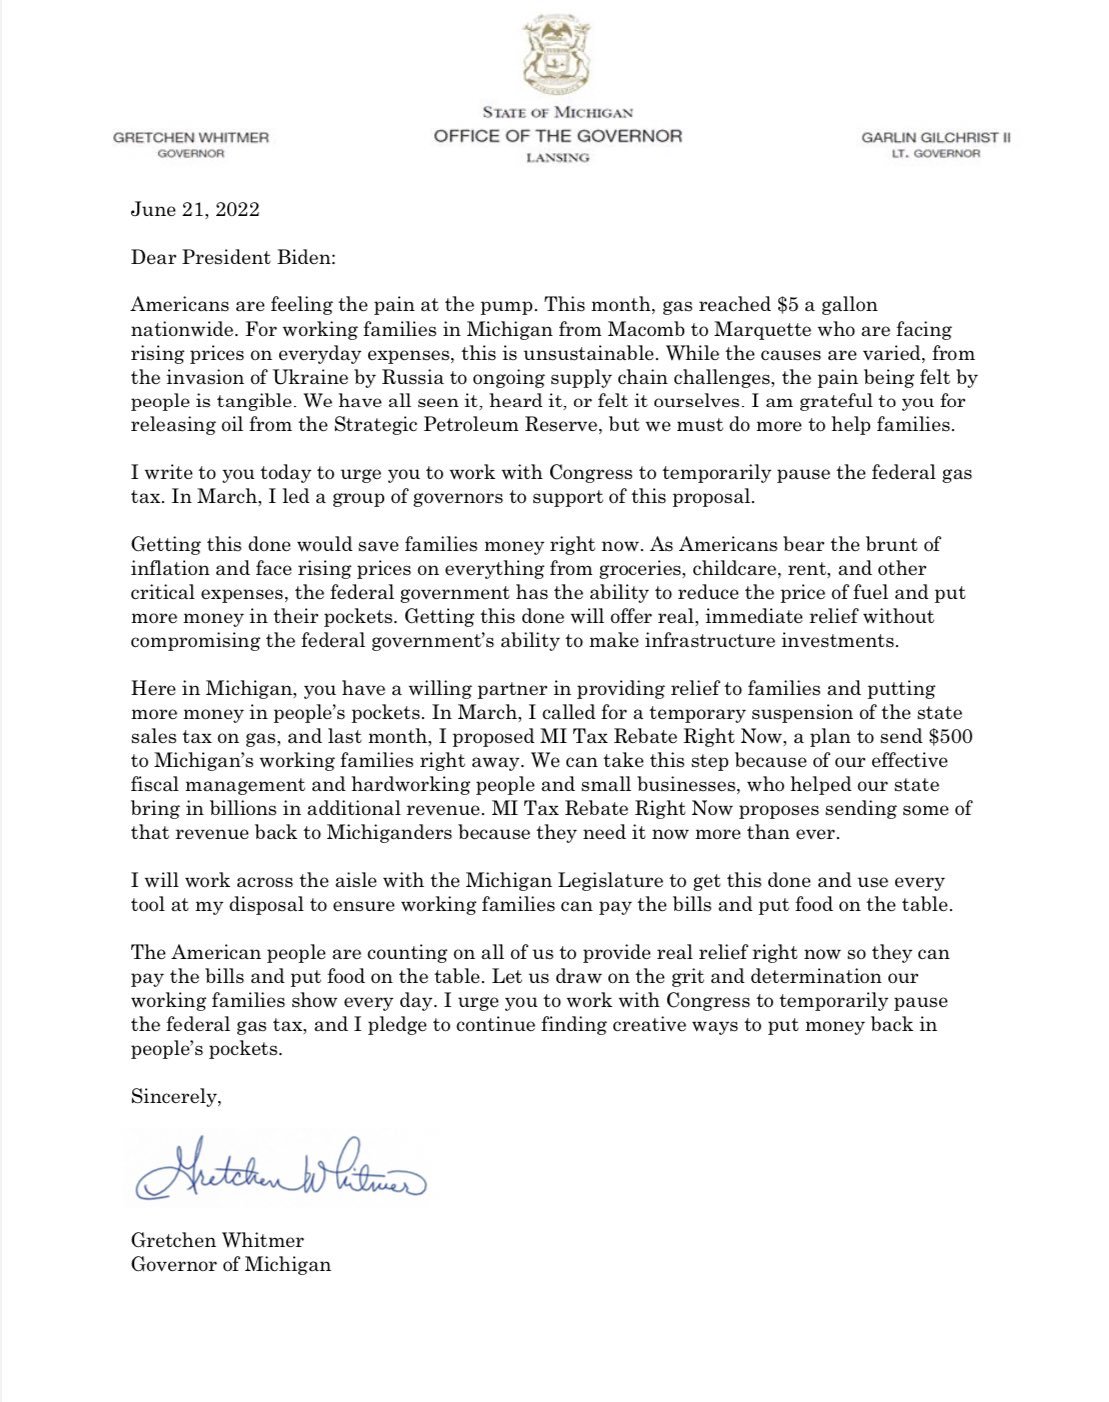 Letter to President Biden calling on pause of federal gas tax